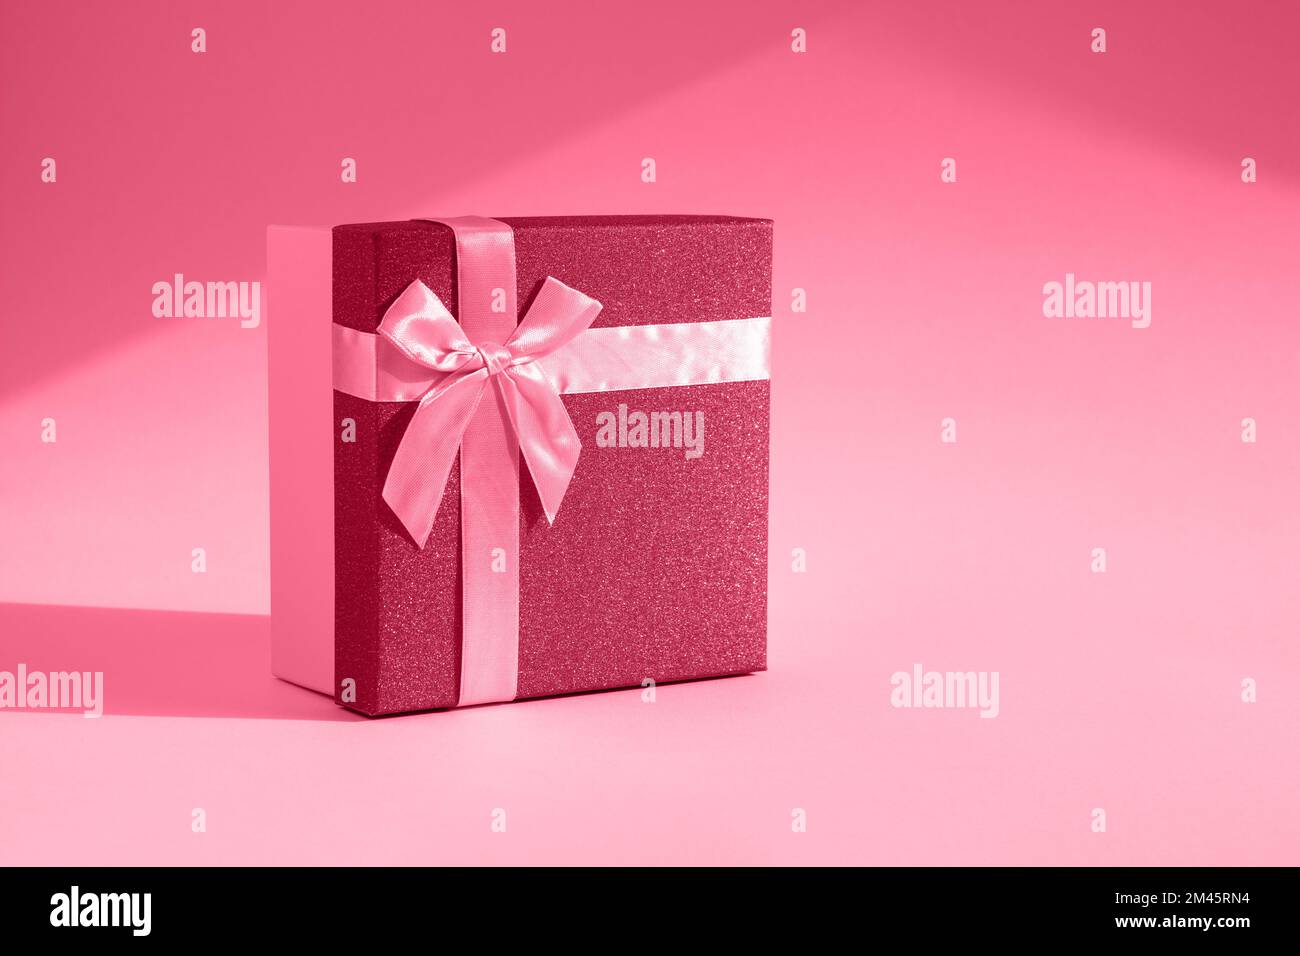 Viva magenta gift. The fashionable trending color of 2023. Tinted image of a gift box on a paper background. The concept of a holiday, birthday, Valen Stock Photo